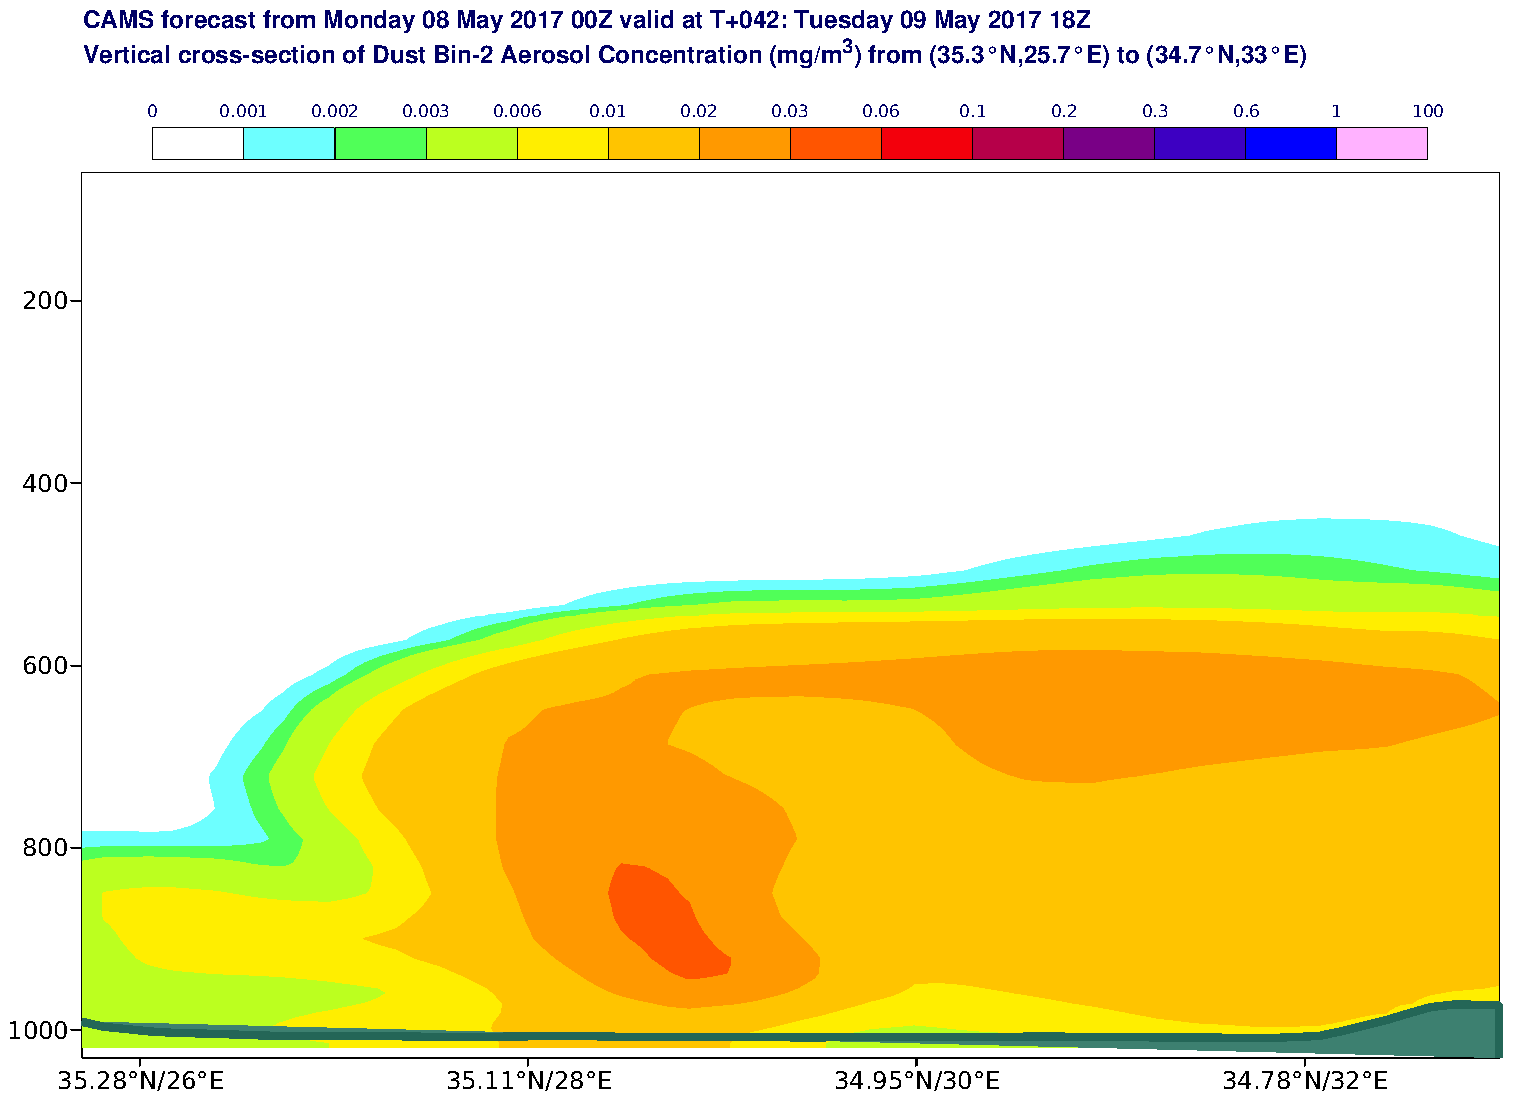 Vertical cross-section of Dust Bin-2 Aerosol Concentration (mg/m3) valid at T42 - 2017-05-09 18:00